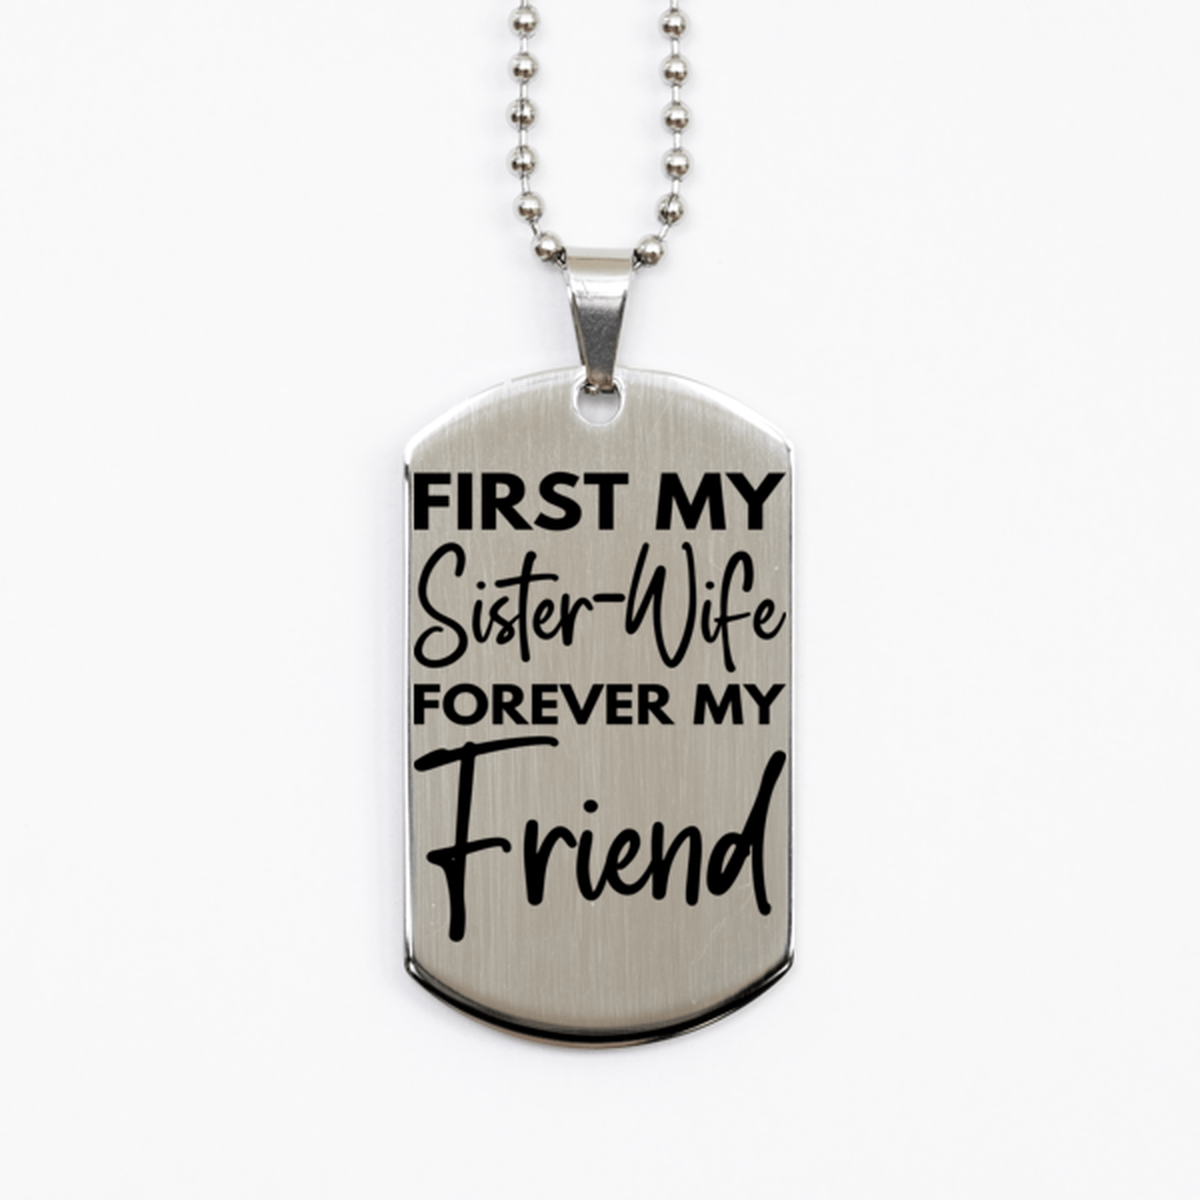 Inspirational Sister-Wife Silver Dog Tag Necklace, First My Sister-Wife Forever My Friend, Best Birthday Gifts for Sister-Wife